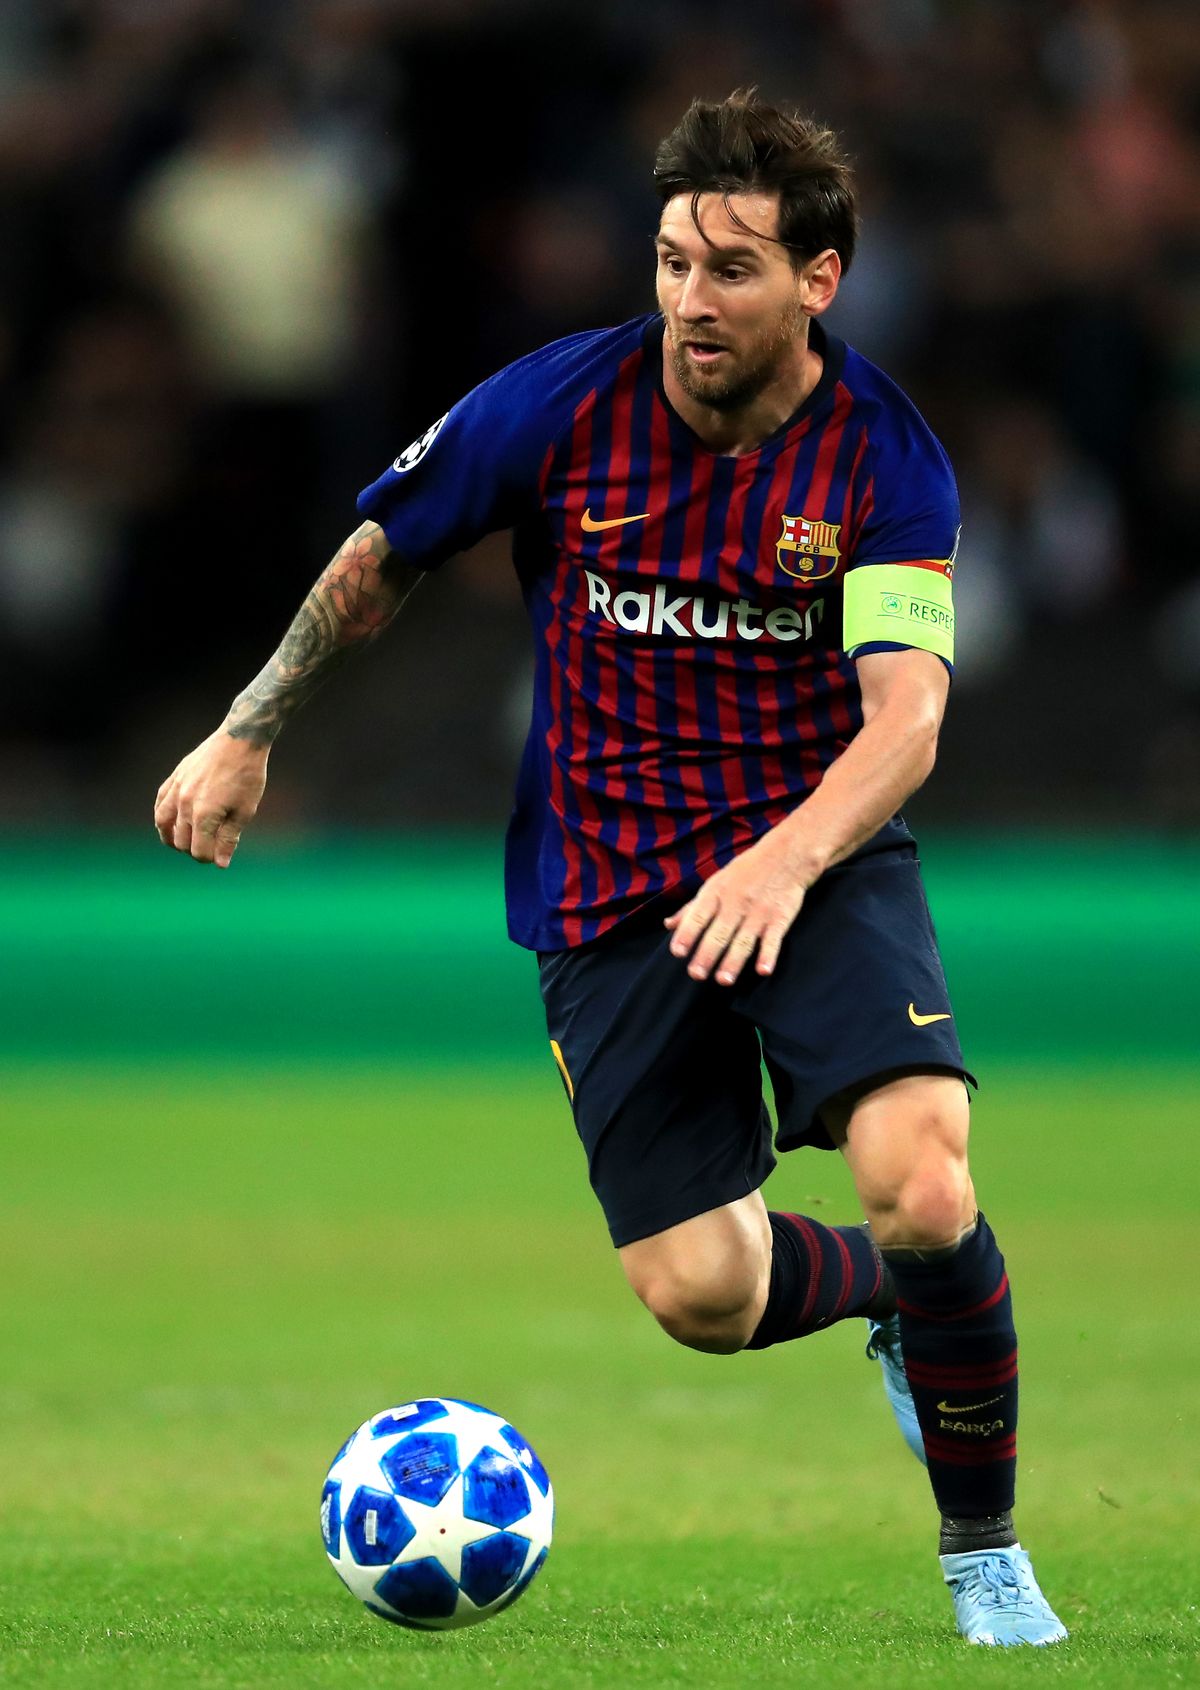 Lionel Messi shown in new Barcelona kit ahead of possible return to